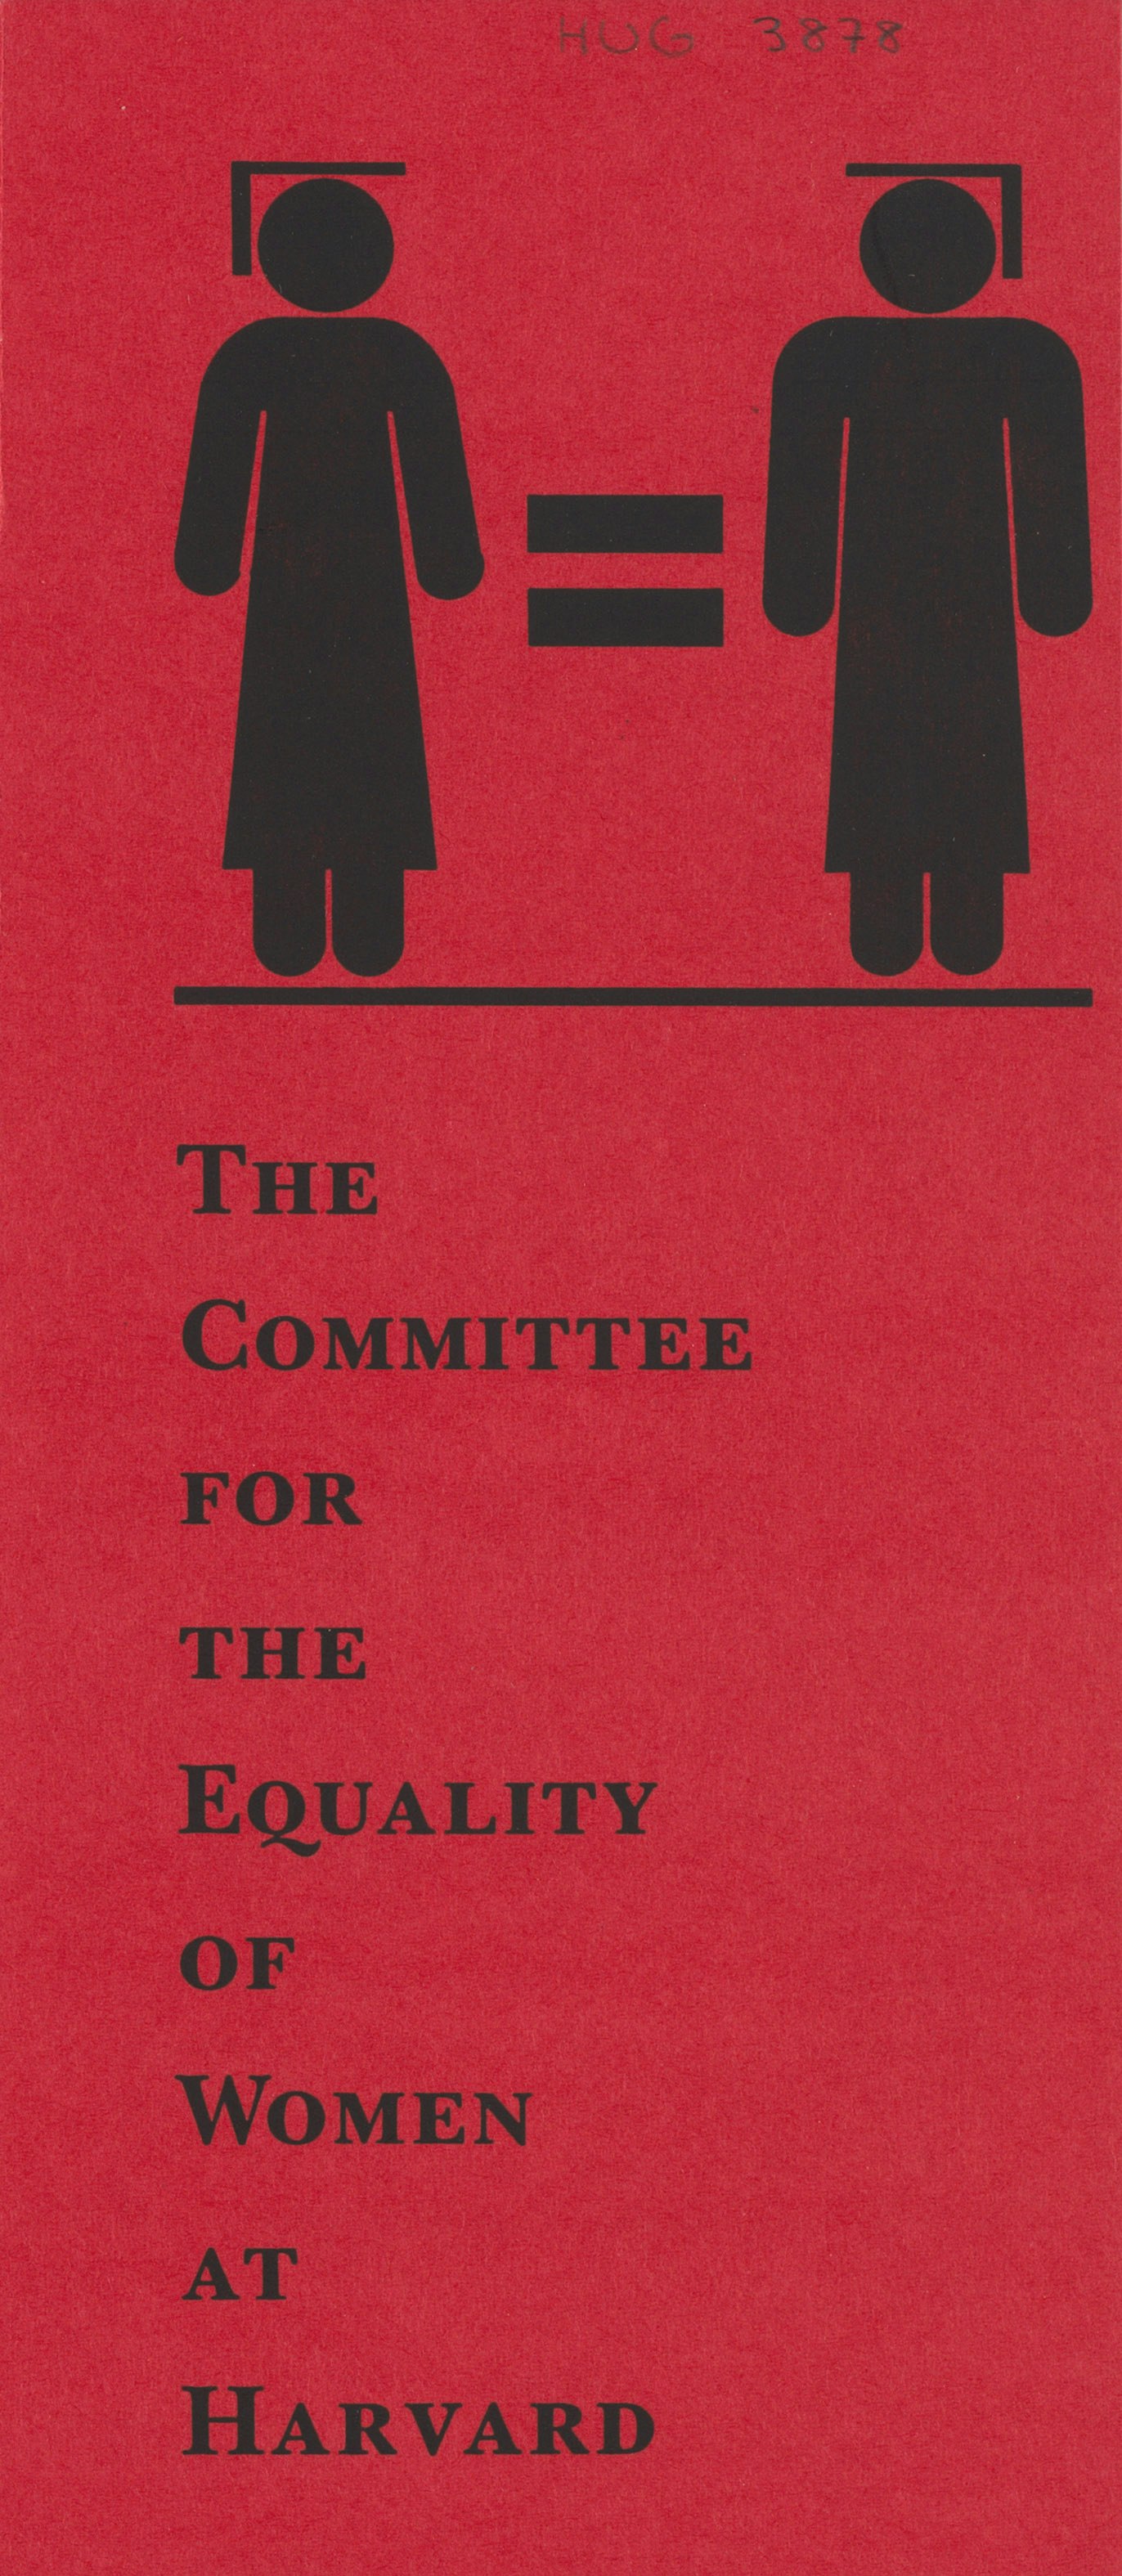 Committee for the Equality of Women Brochure